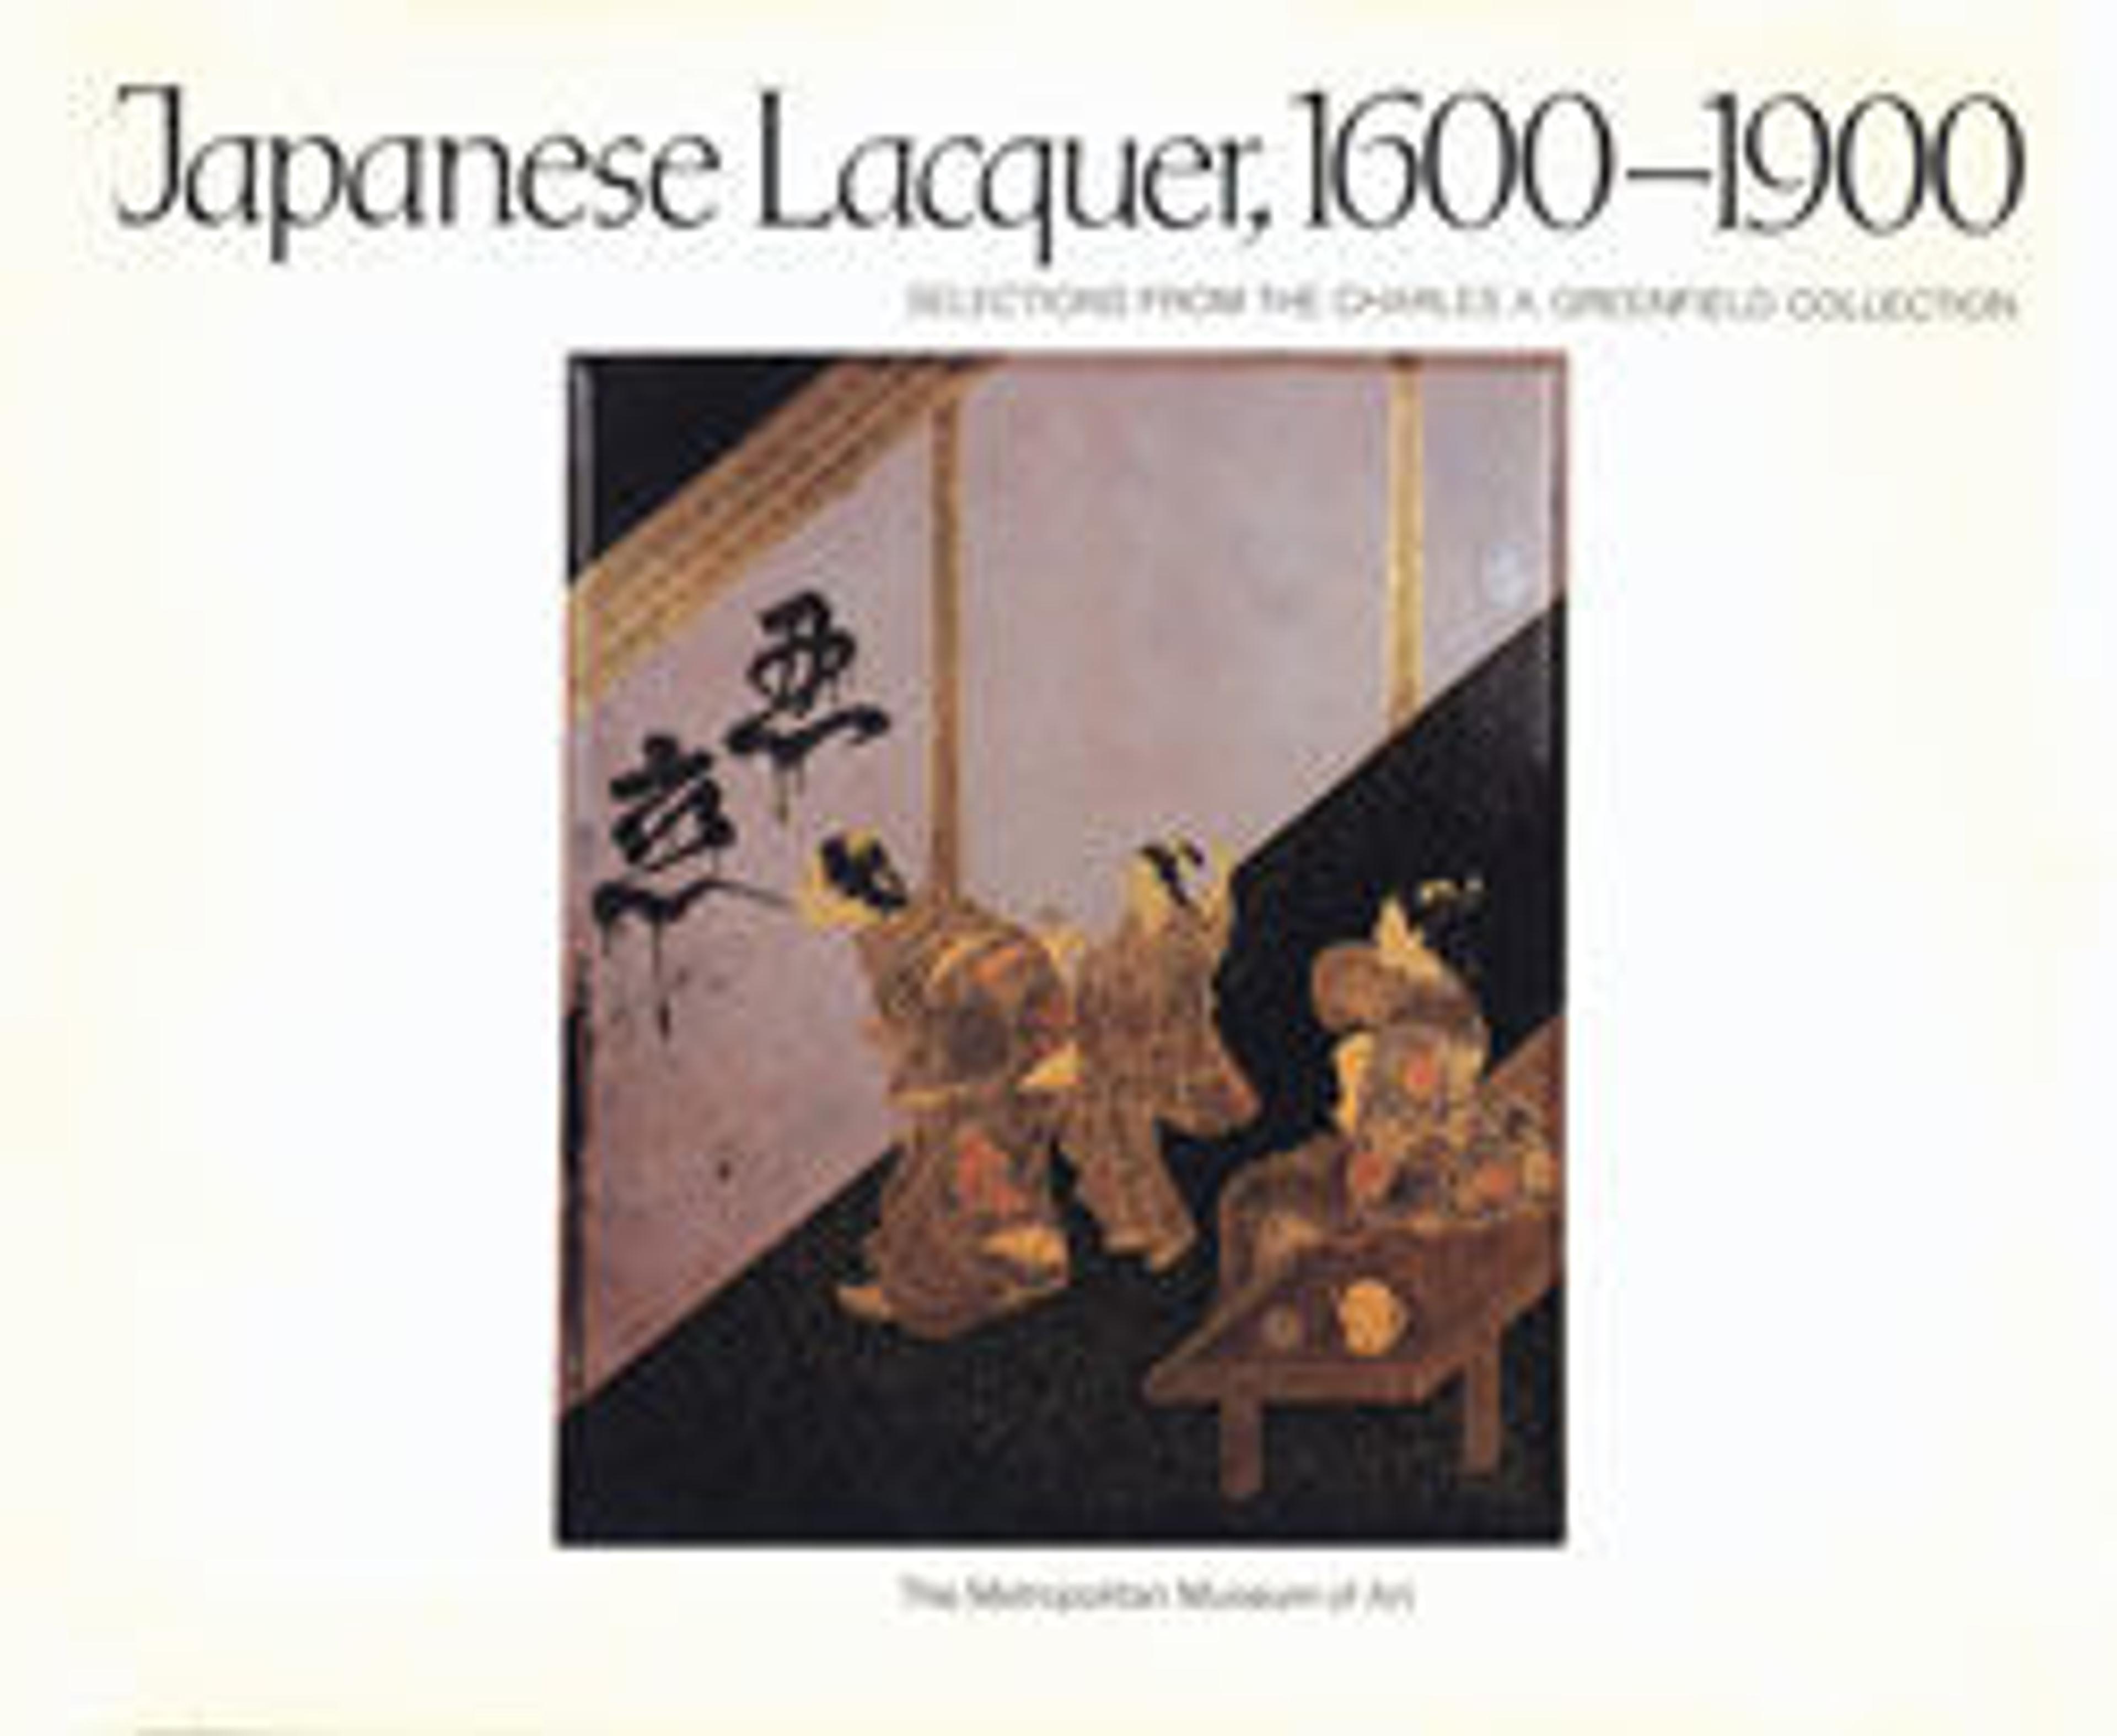 Japanese Lacquer, 1600-1900: Selections from the Charles A. Greenﬁeld Collection